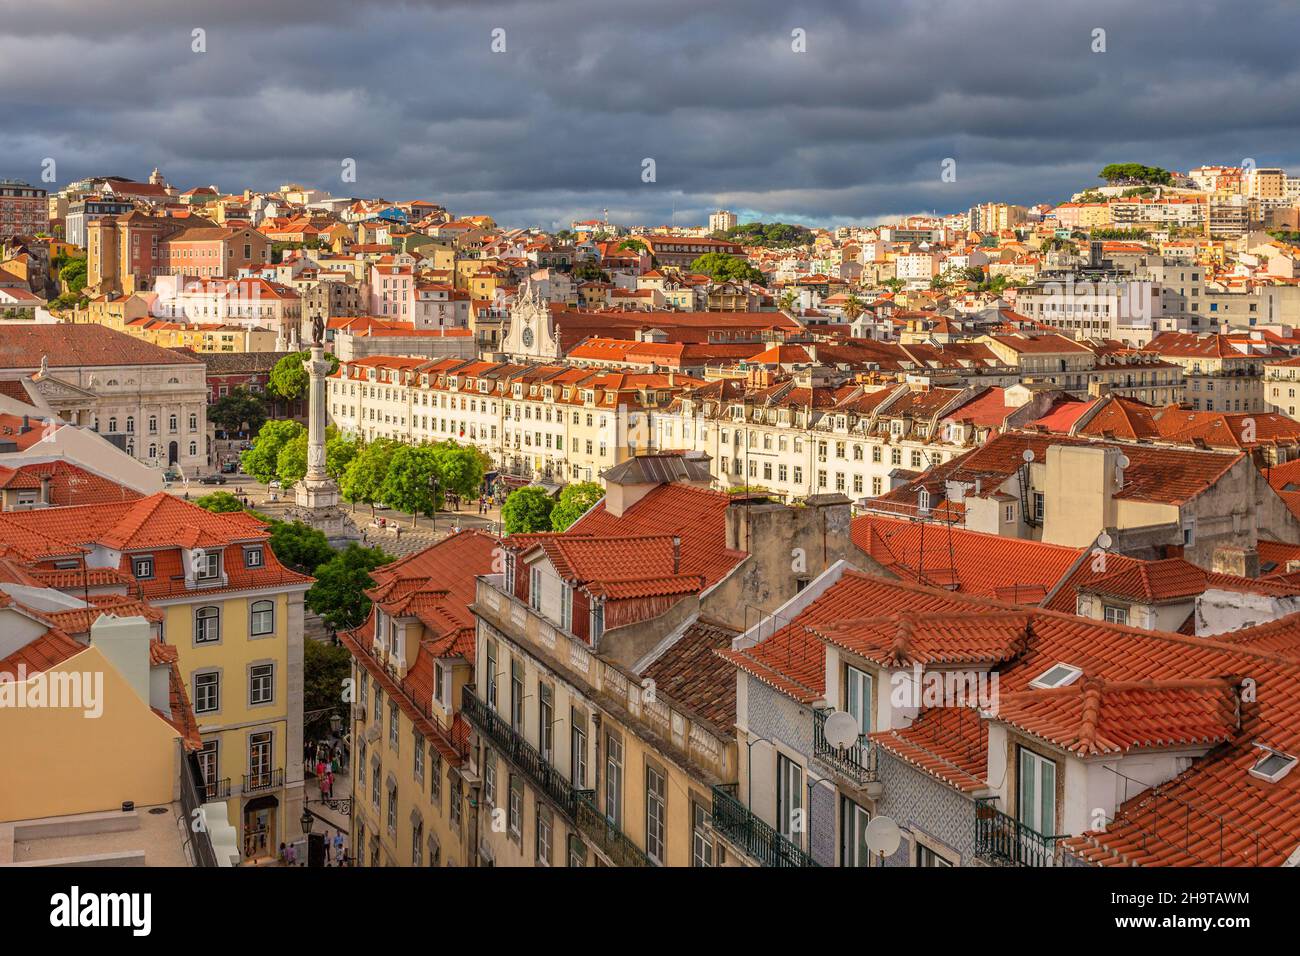 View to King Pedro IV Square and old city center streets with orange tiled houses , Lisbon, Portugal Stock Photo